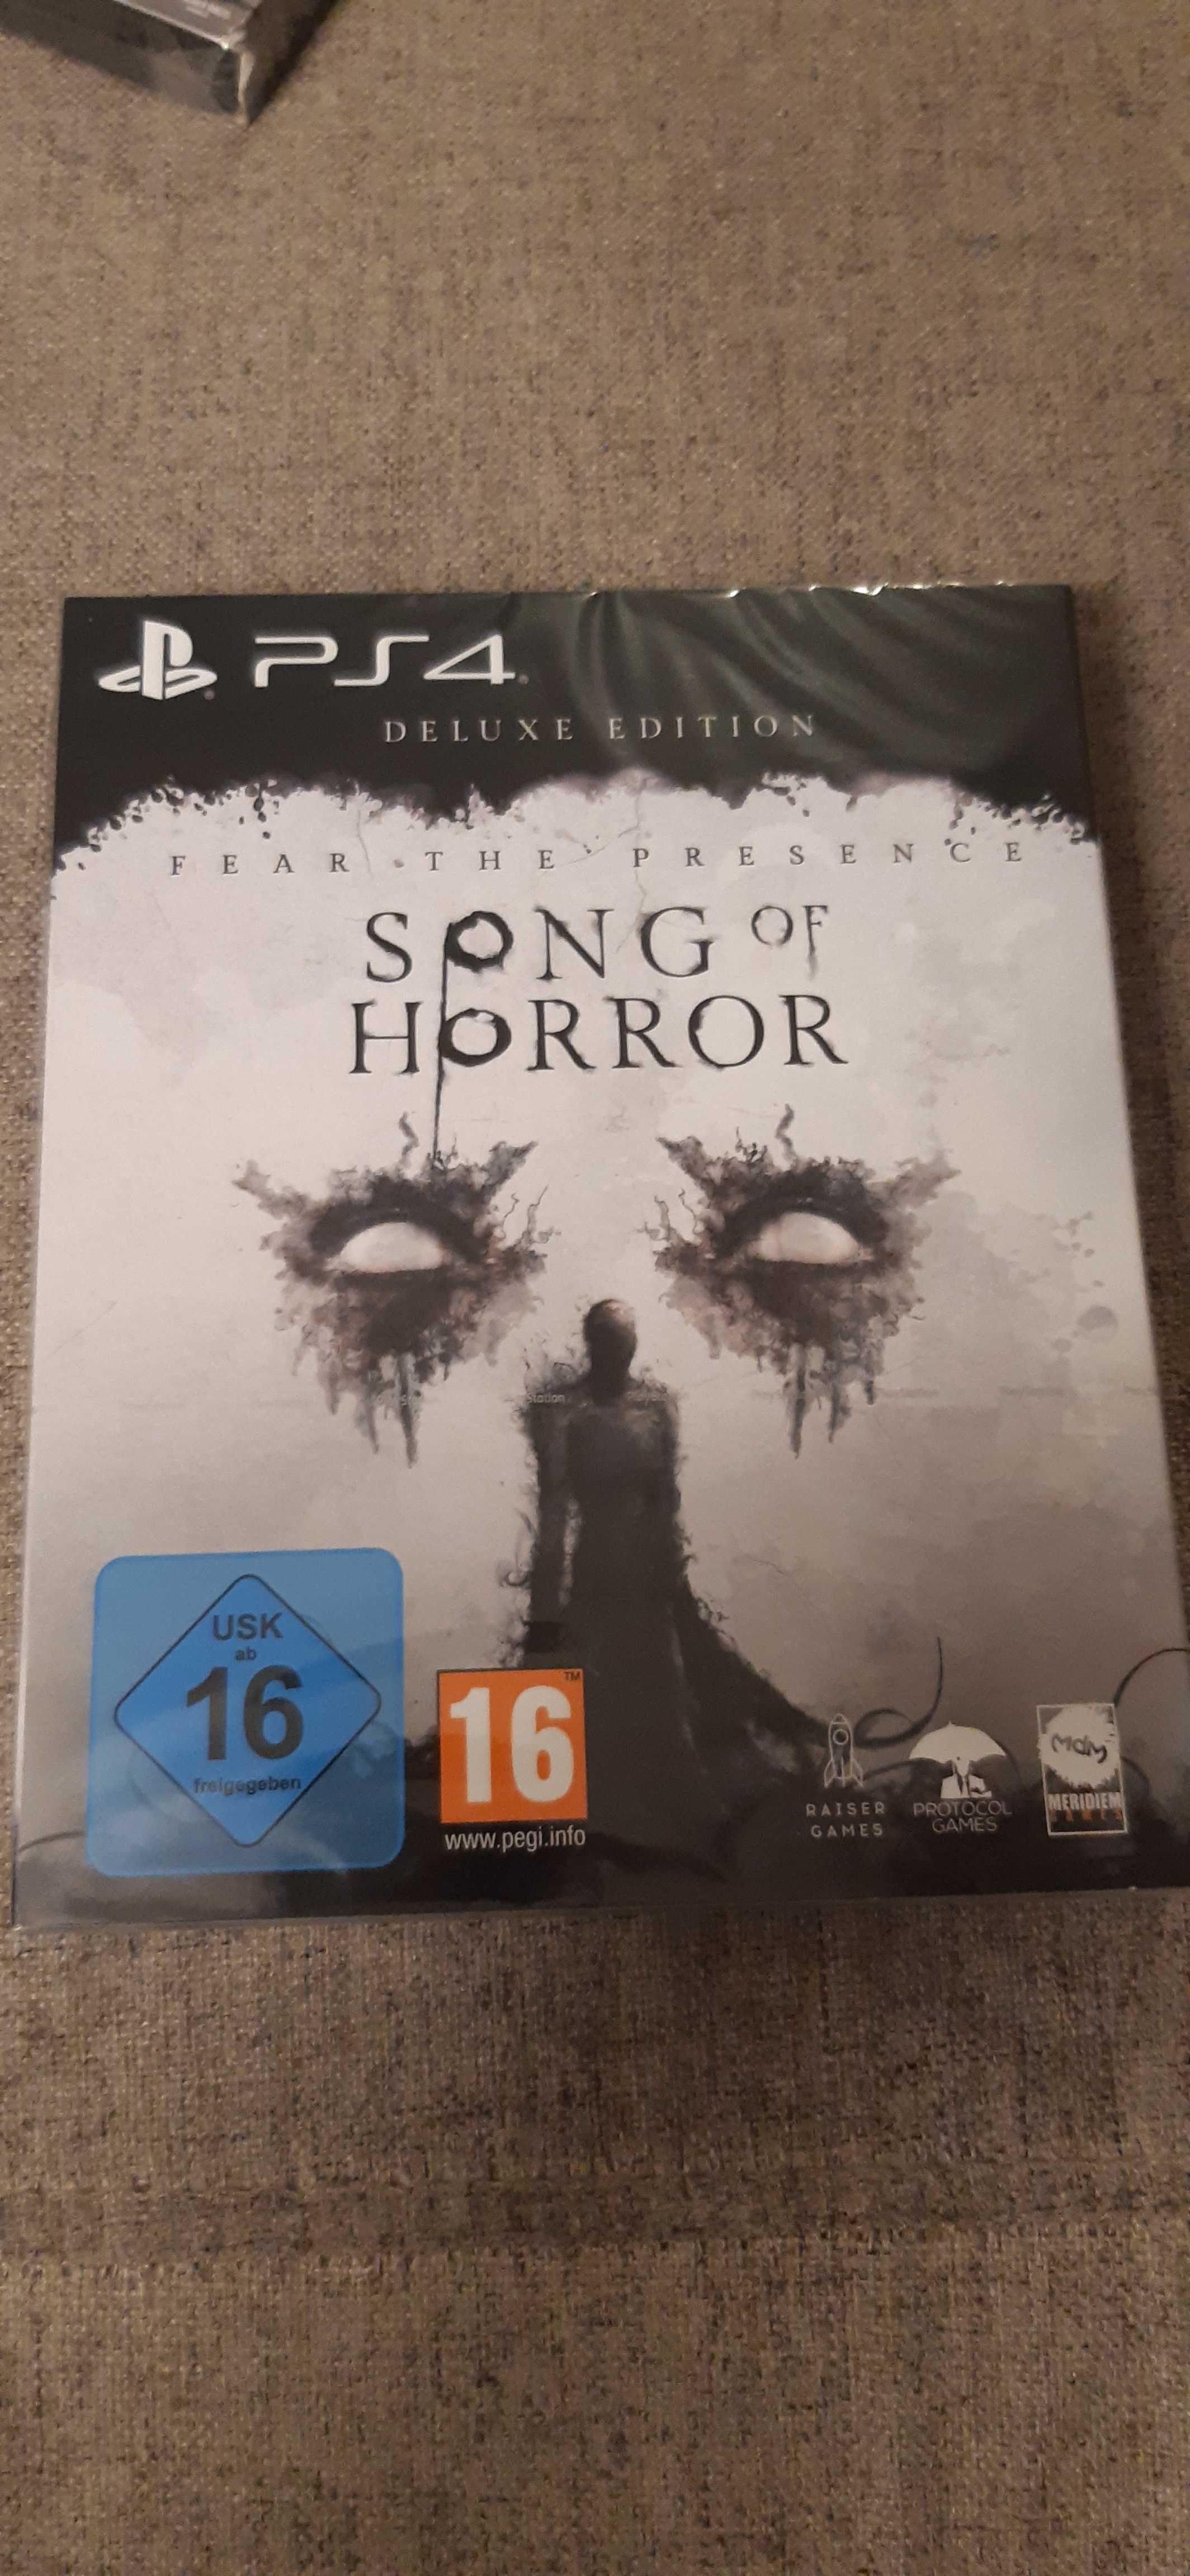 Song of Horror - Deluxe Edition PS4 nowa folia